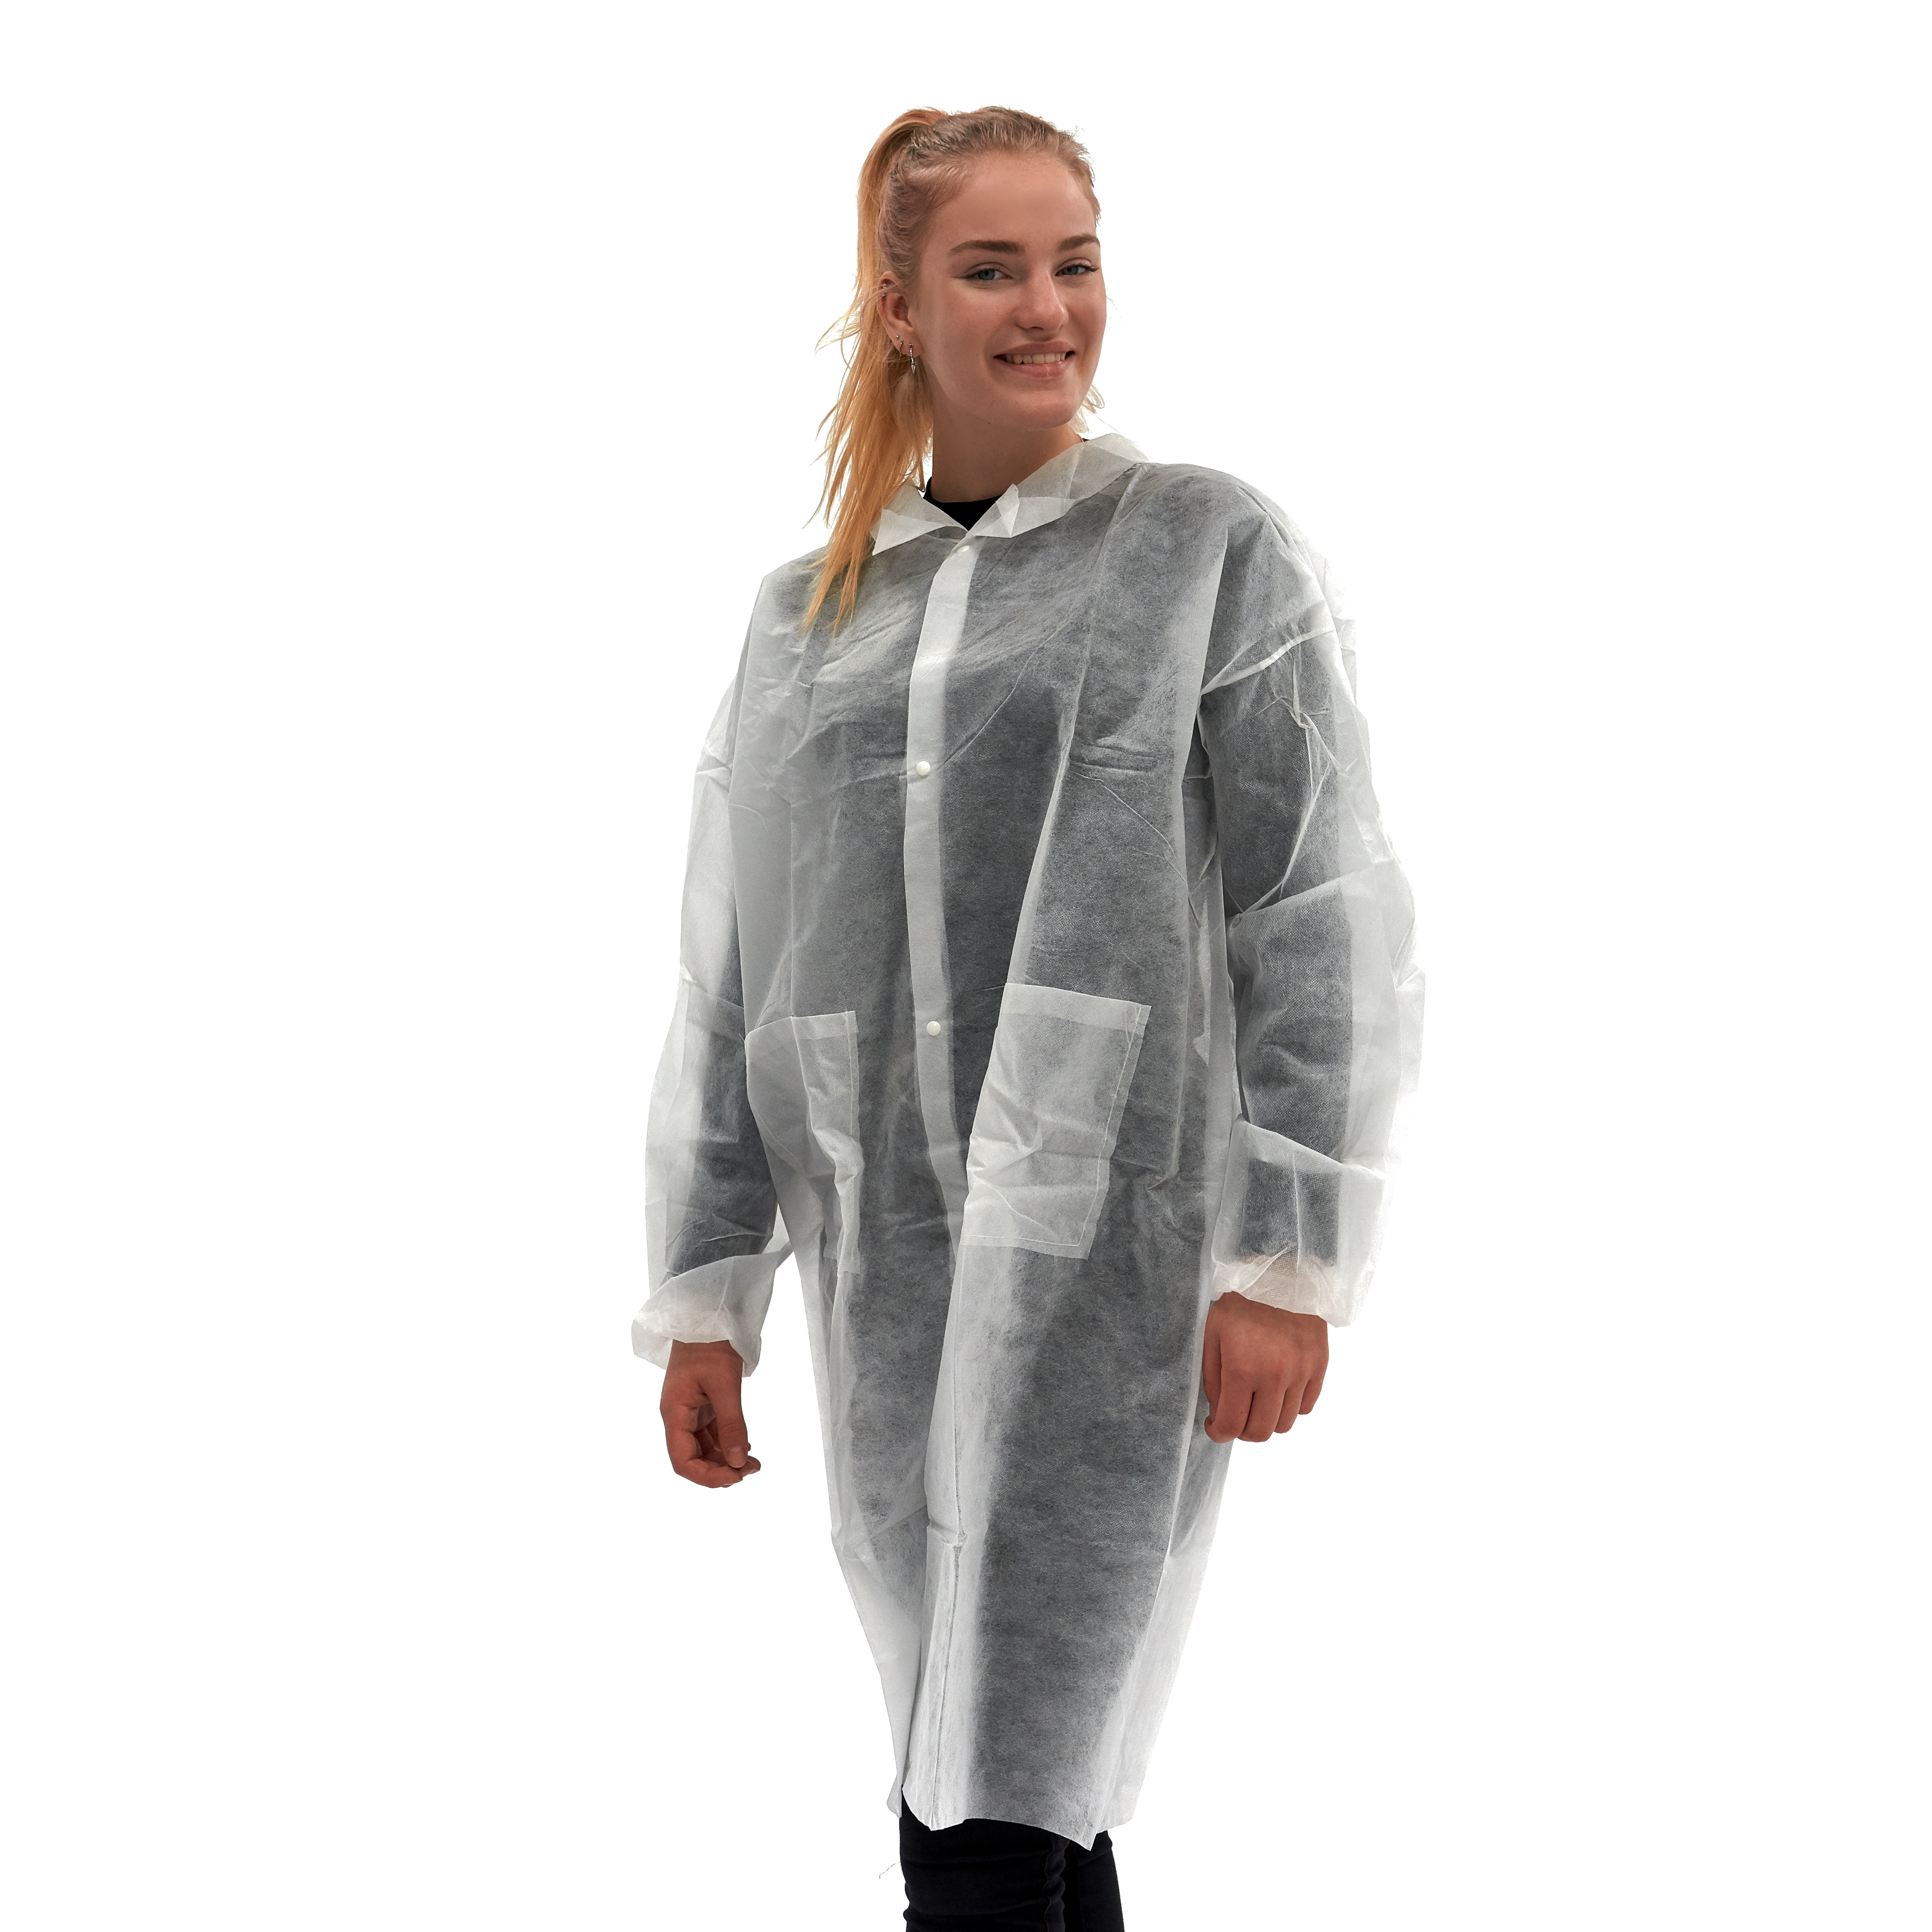 VC-XL Romed visitor coats, size x-large, non-woven, white, per piece in a polybag, 50 pcs in a carton.